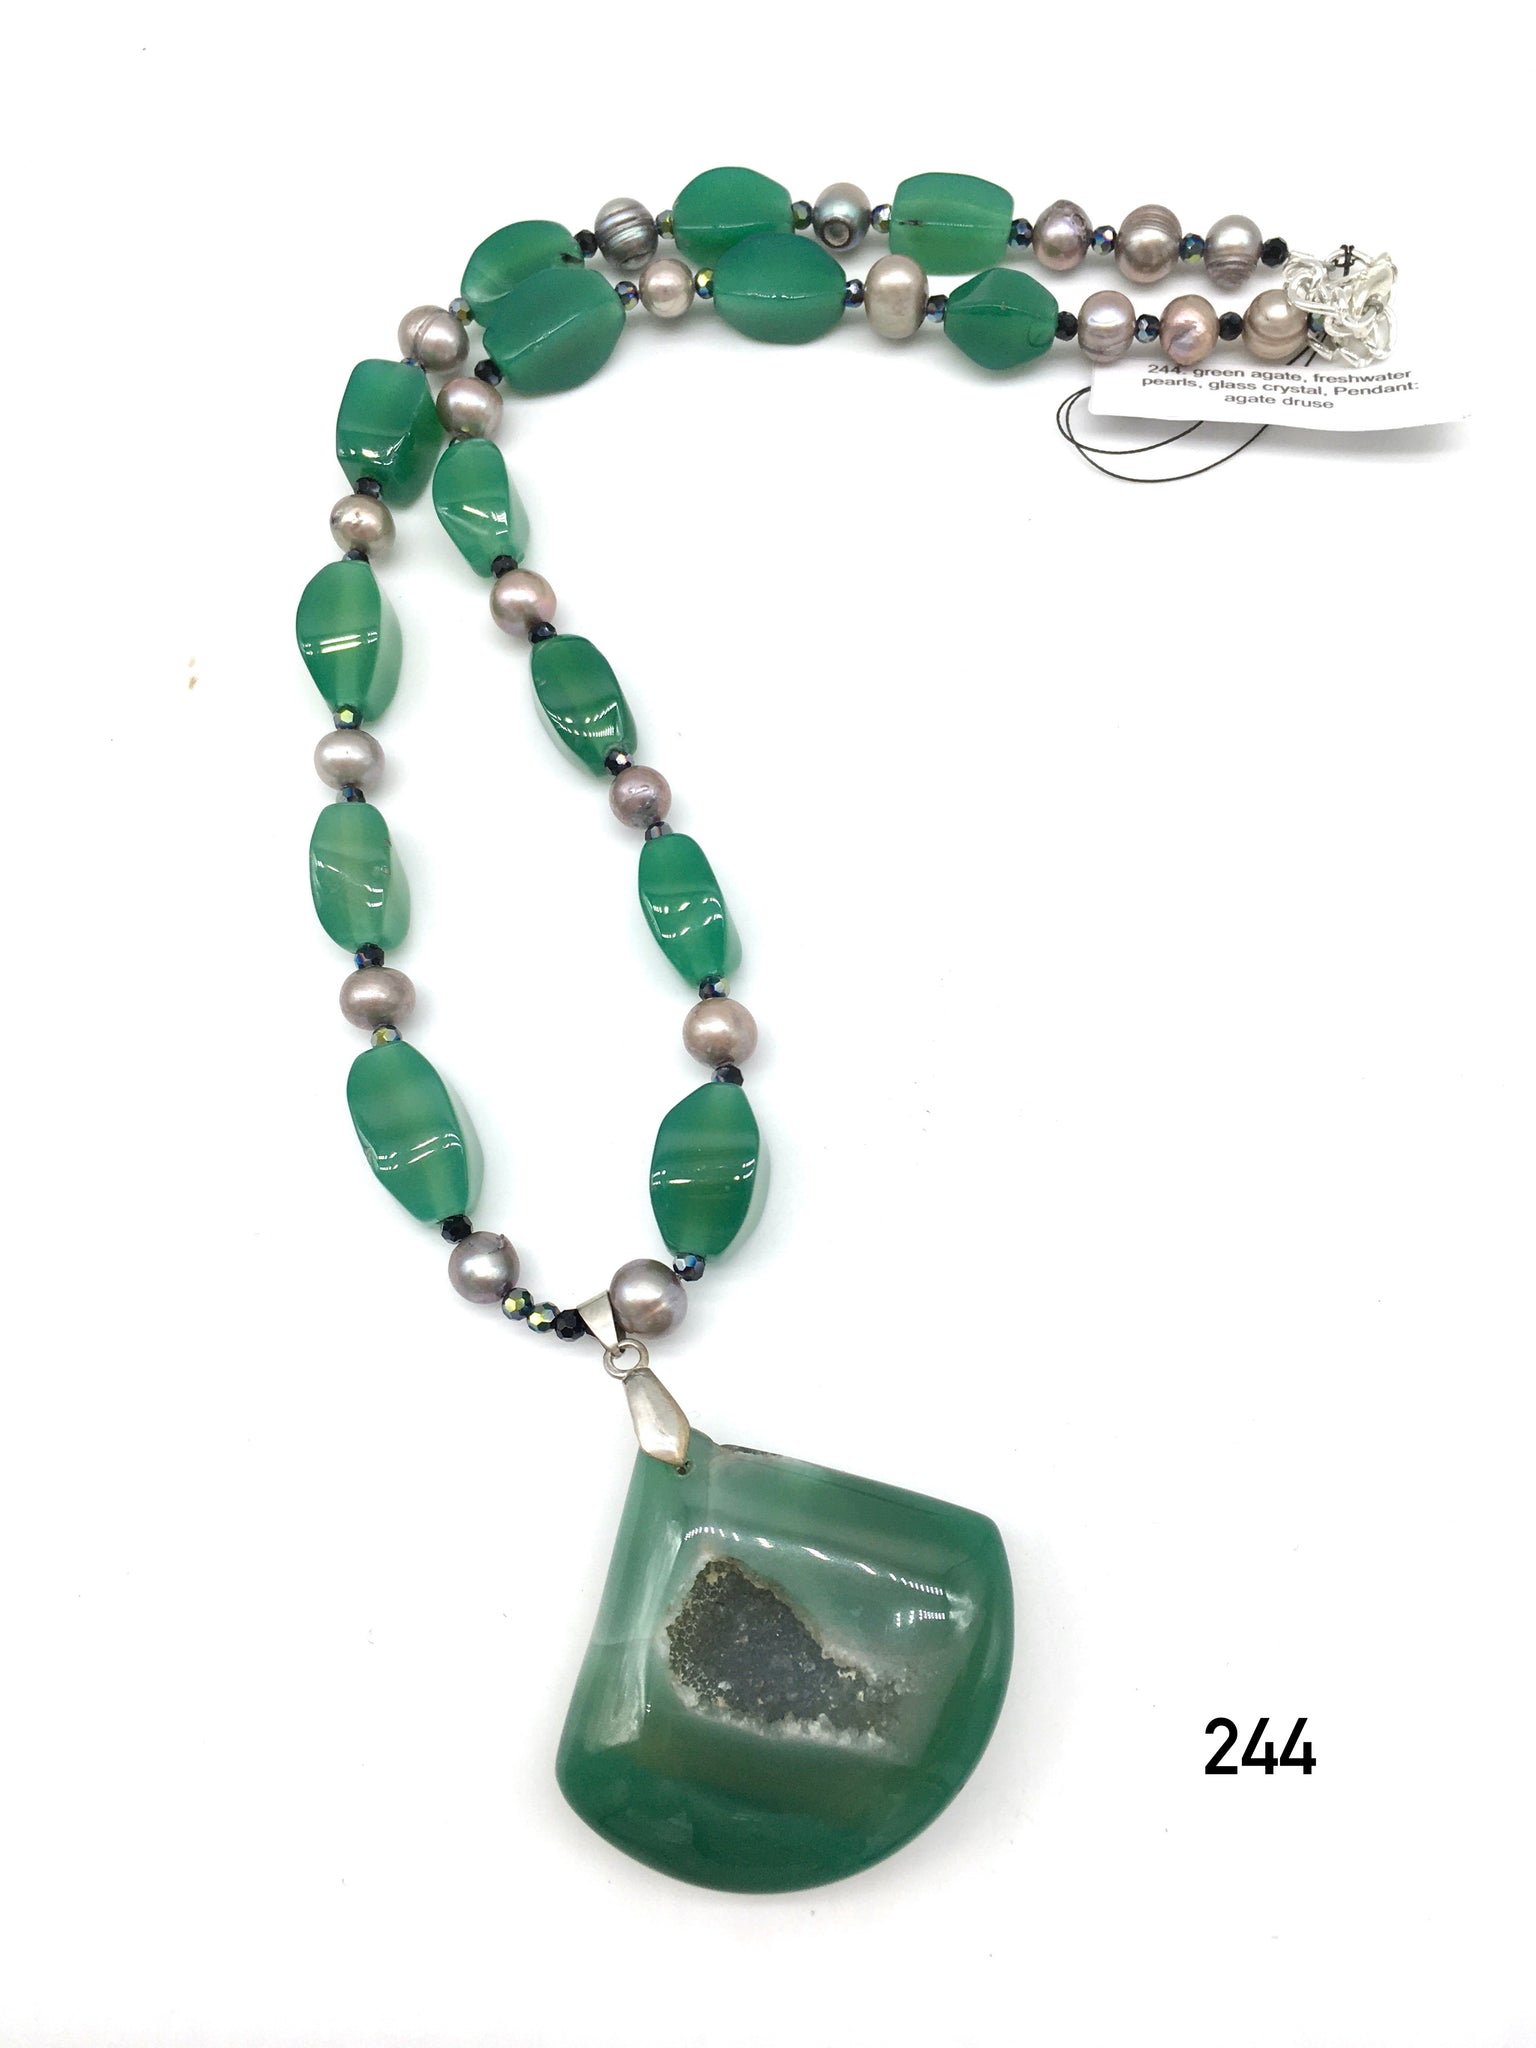 Green agate, freshwater pearls, glass crystal, Pendant agate druse